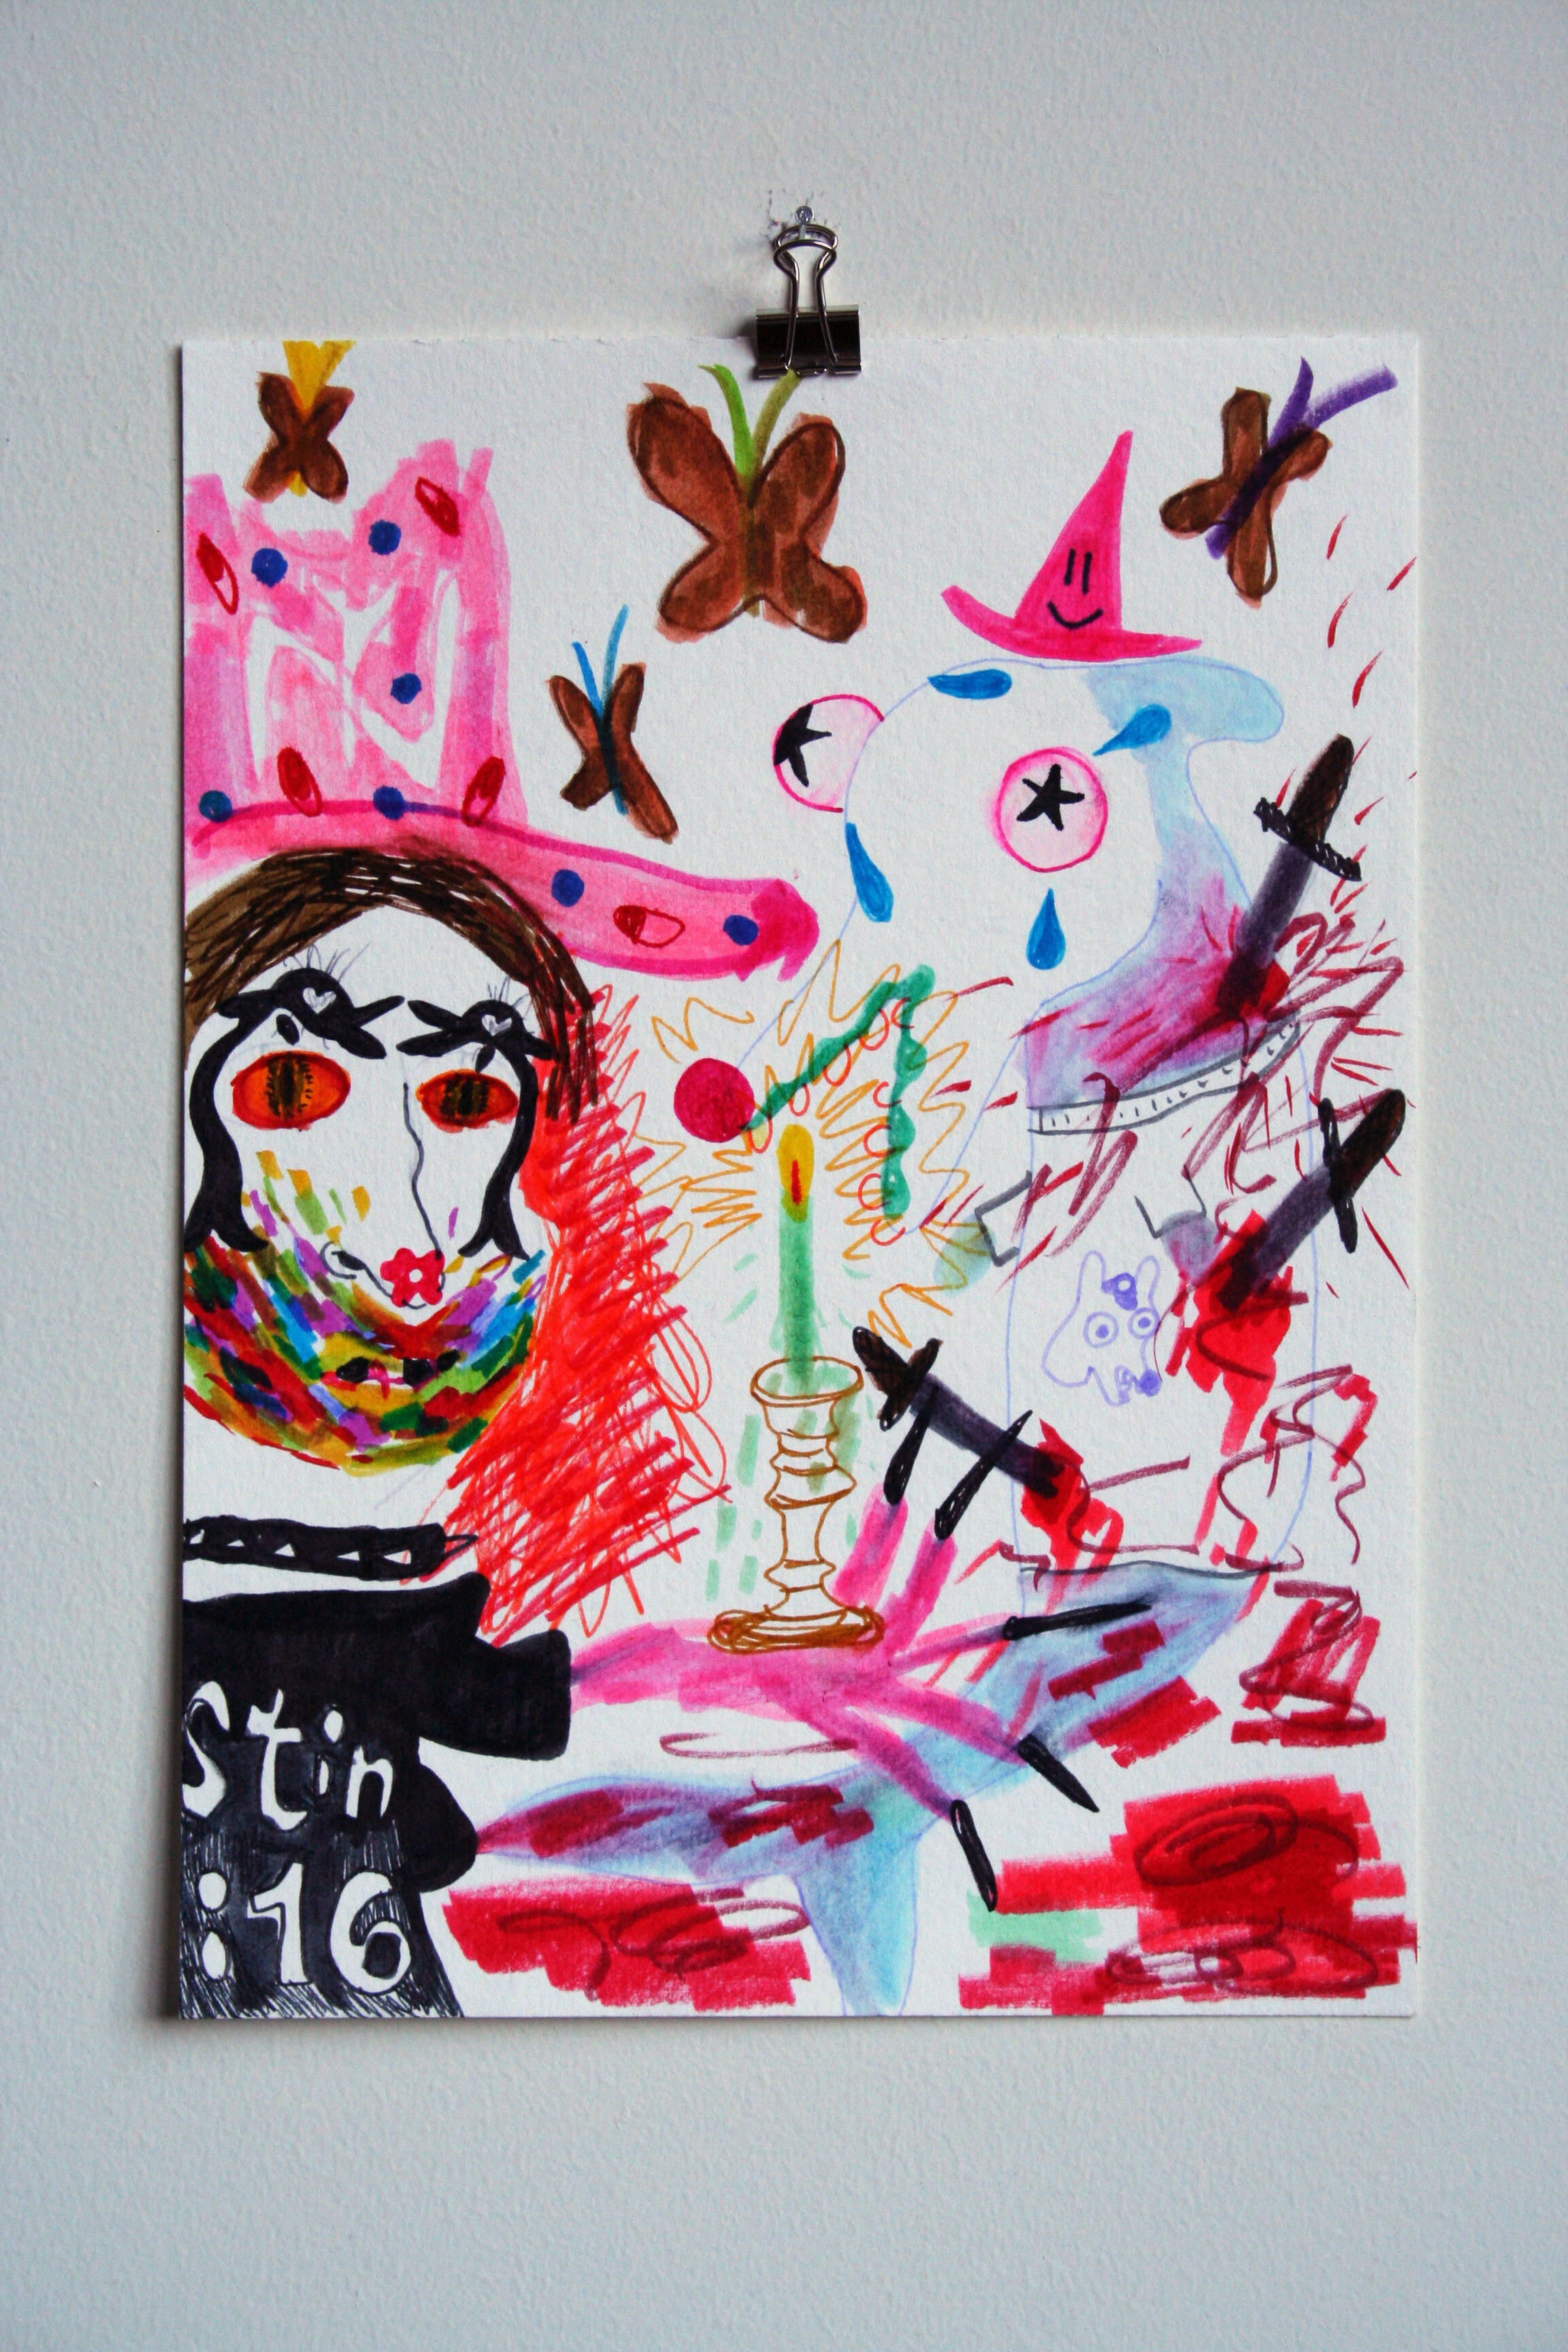   Radio Old Put’s Henry Ford Village Candlestick,  2015  9 x 12 inches (22.86 x 30.48 cm.)  Marker on paper  